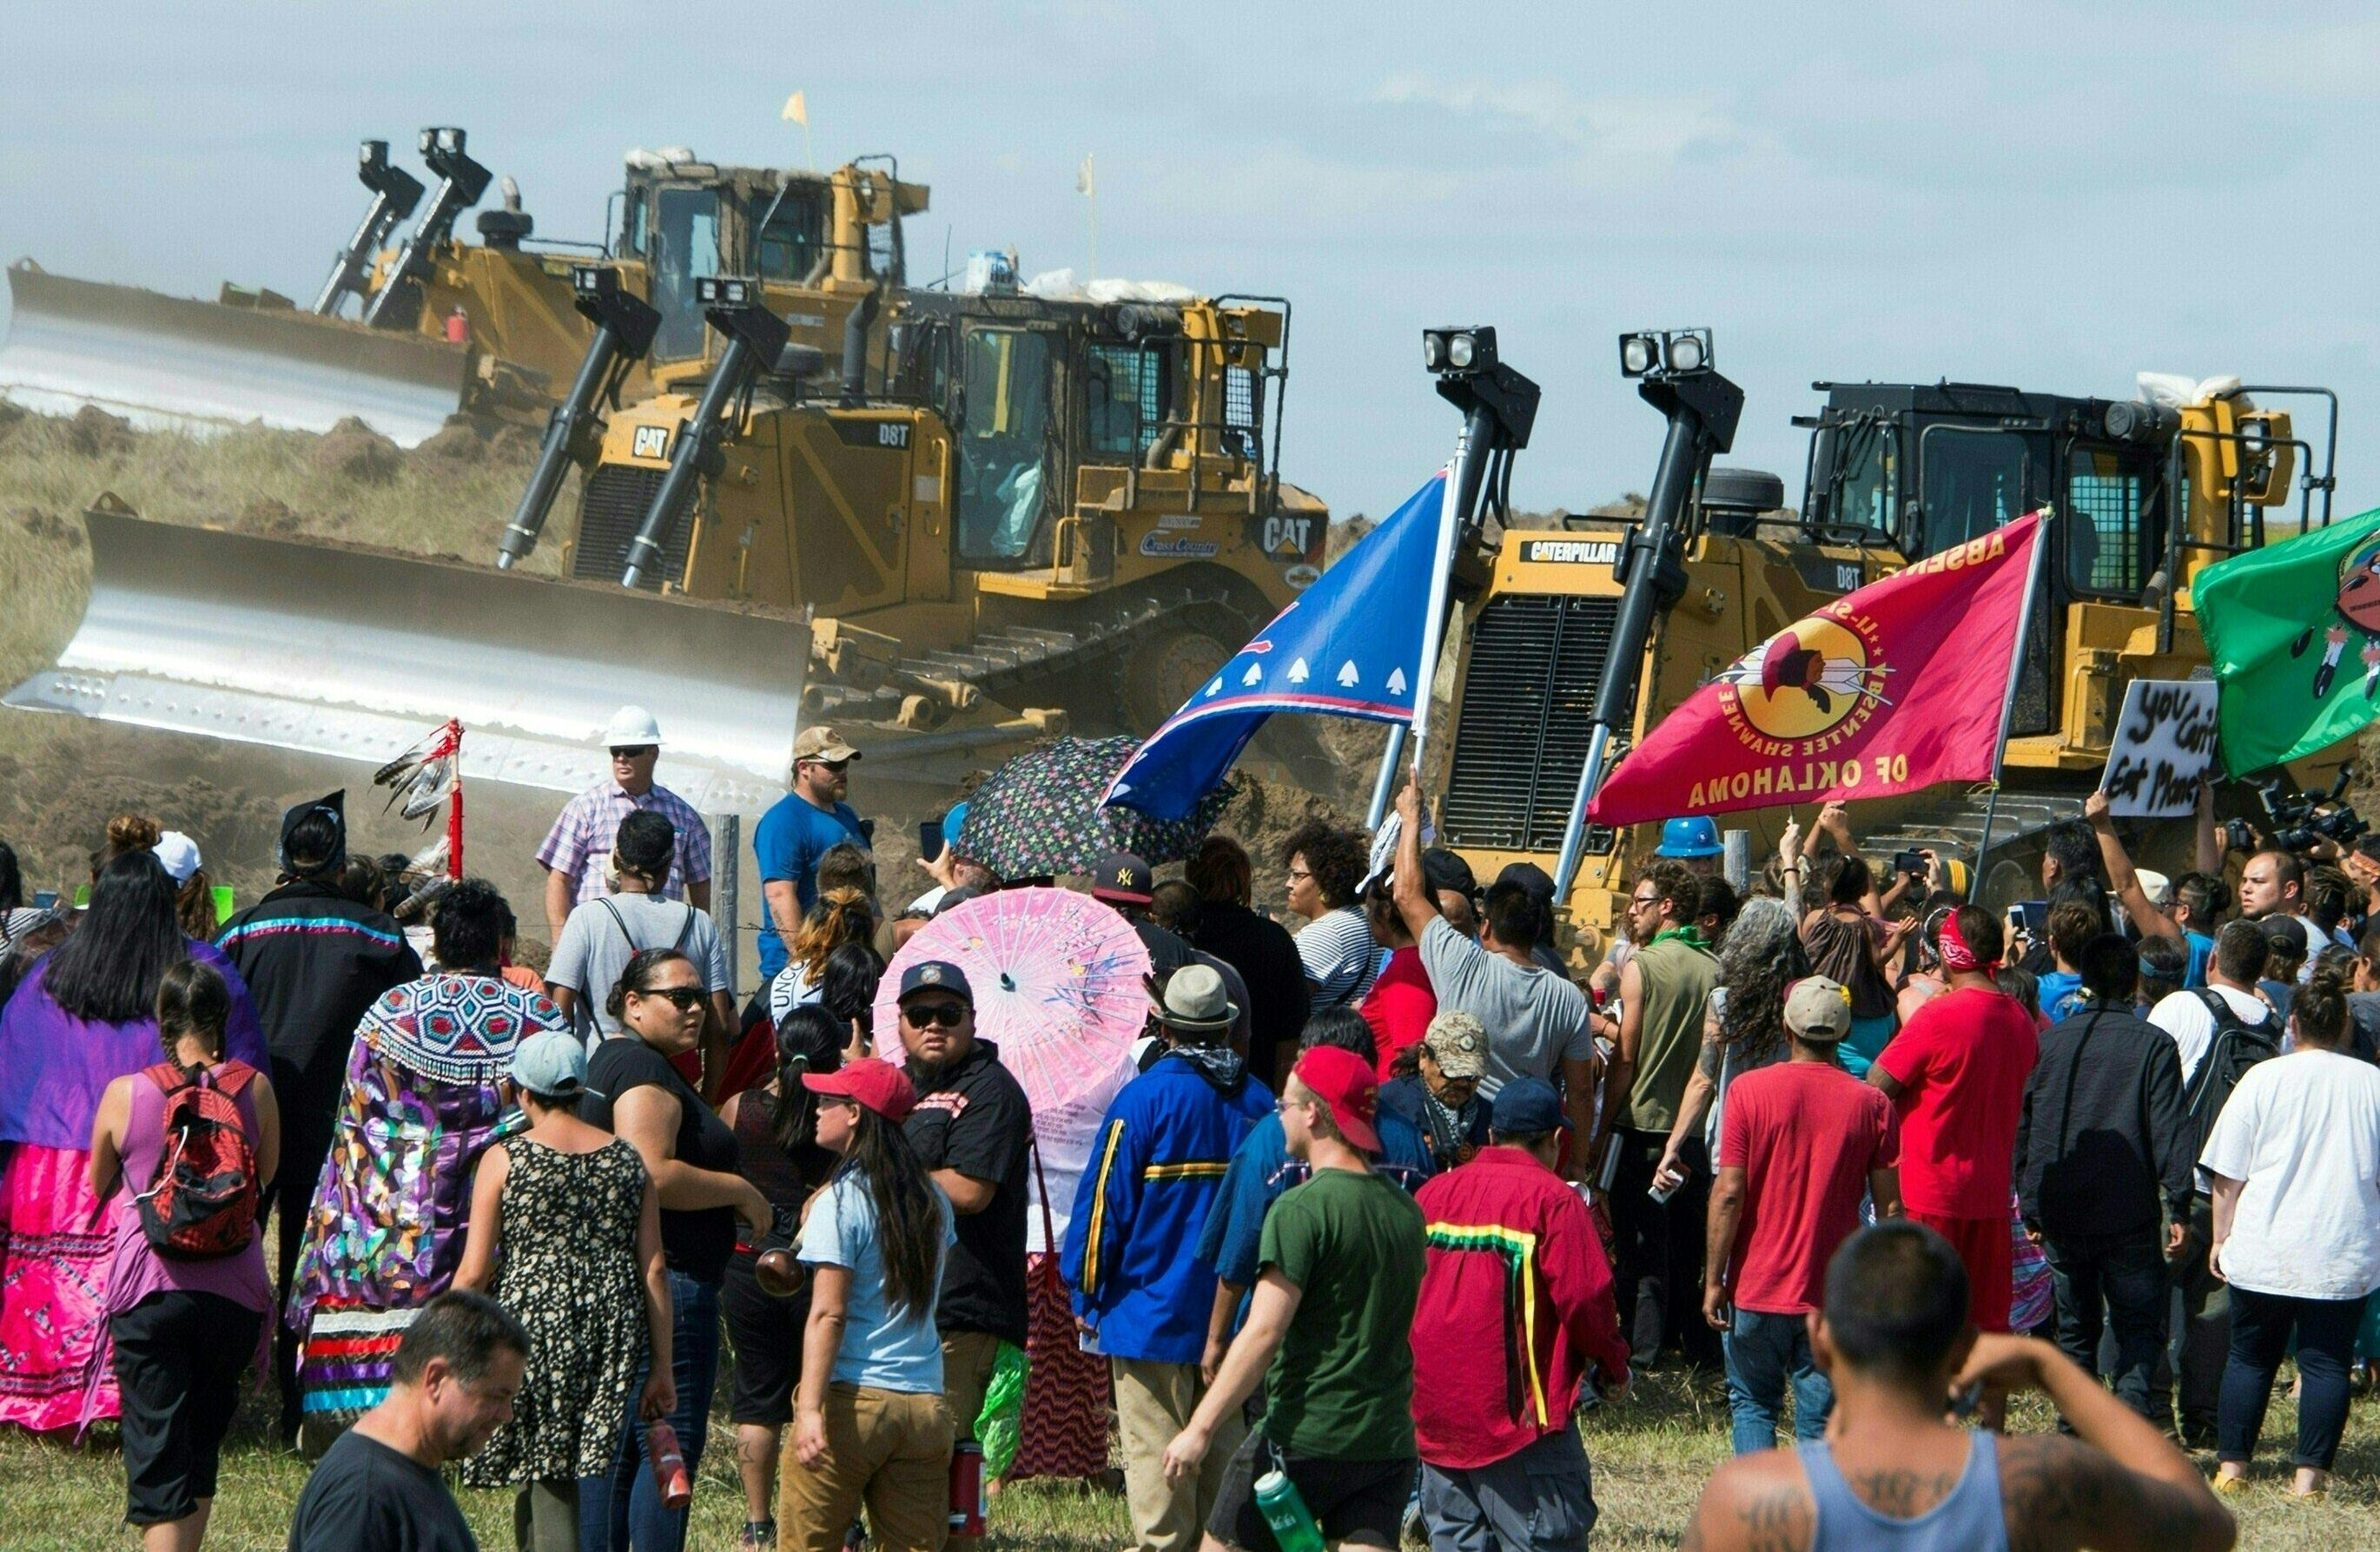 Members of the Standing Rock Sioux Tribe and their supporters opposed to the Dakota Access Pipeline (DAPL) confront bulldozers working on the new oil pipeline in an effort to make them stop, September 3, 2016, near Cannon Ball, North Dakota. / AFP / Robyn